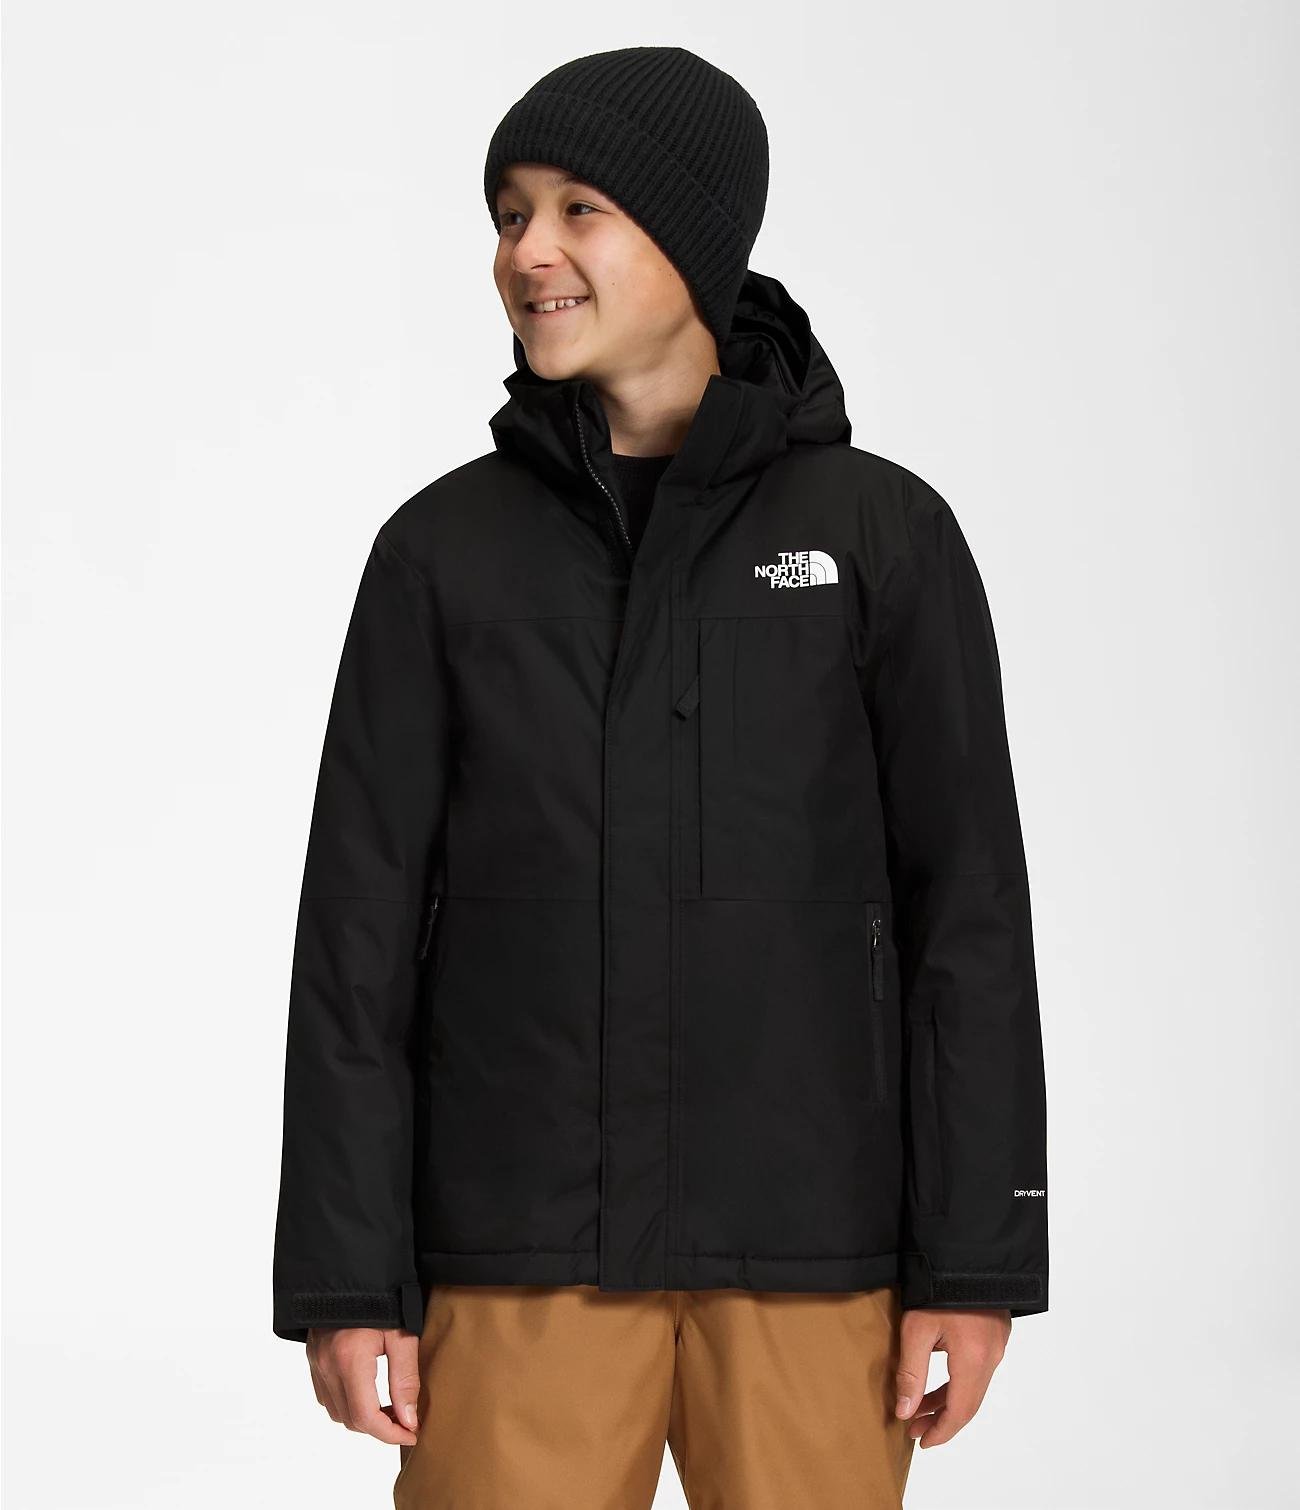 Boys’ Freedom Extreme Insulated Jacket by THE NORTH FACE | jellibeans